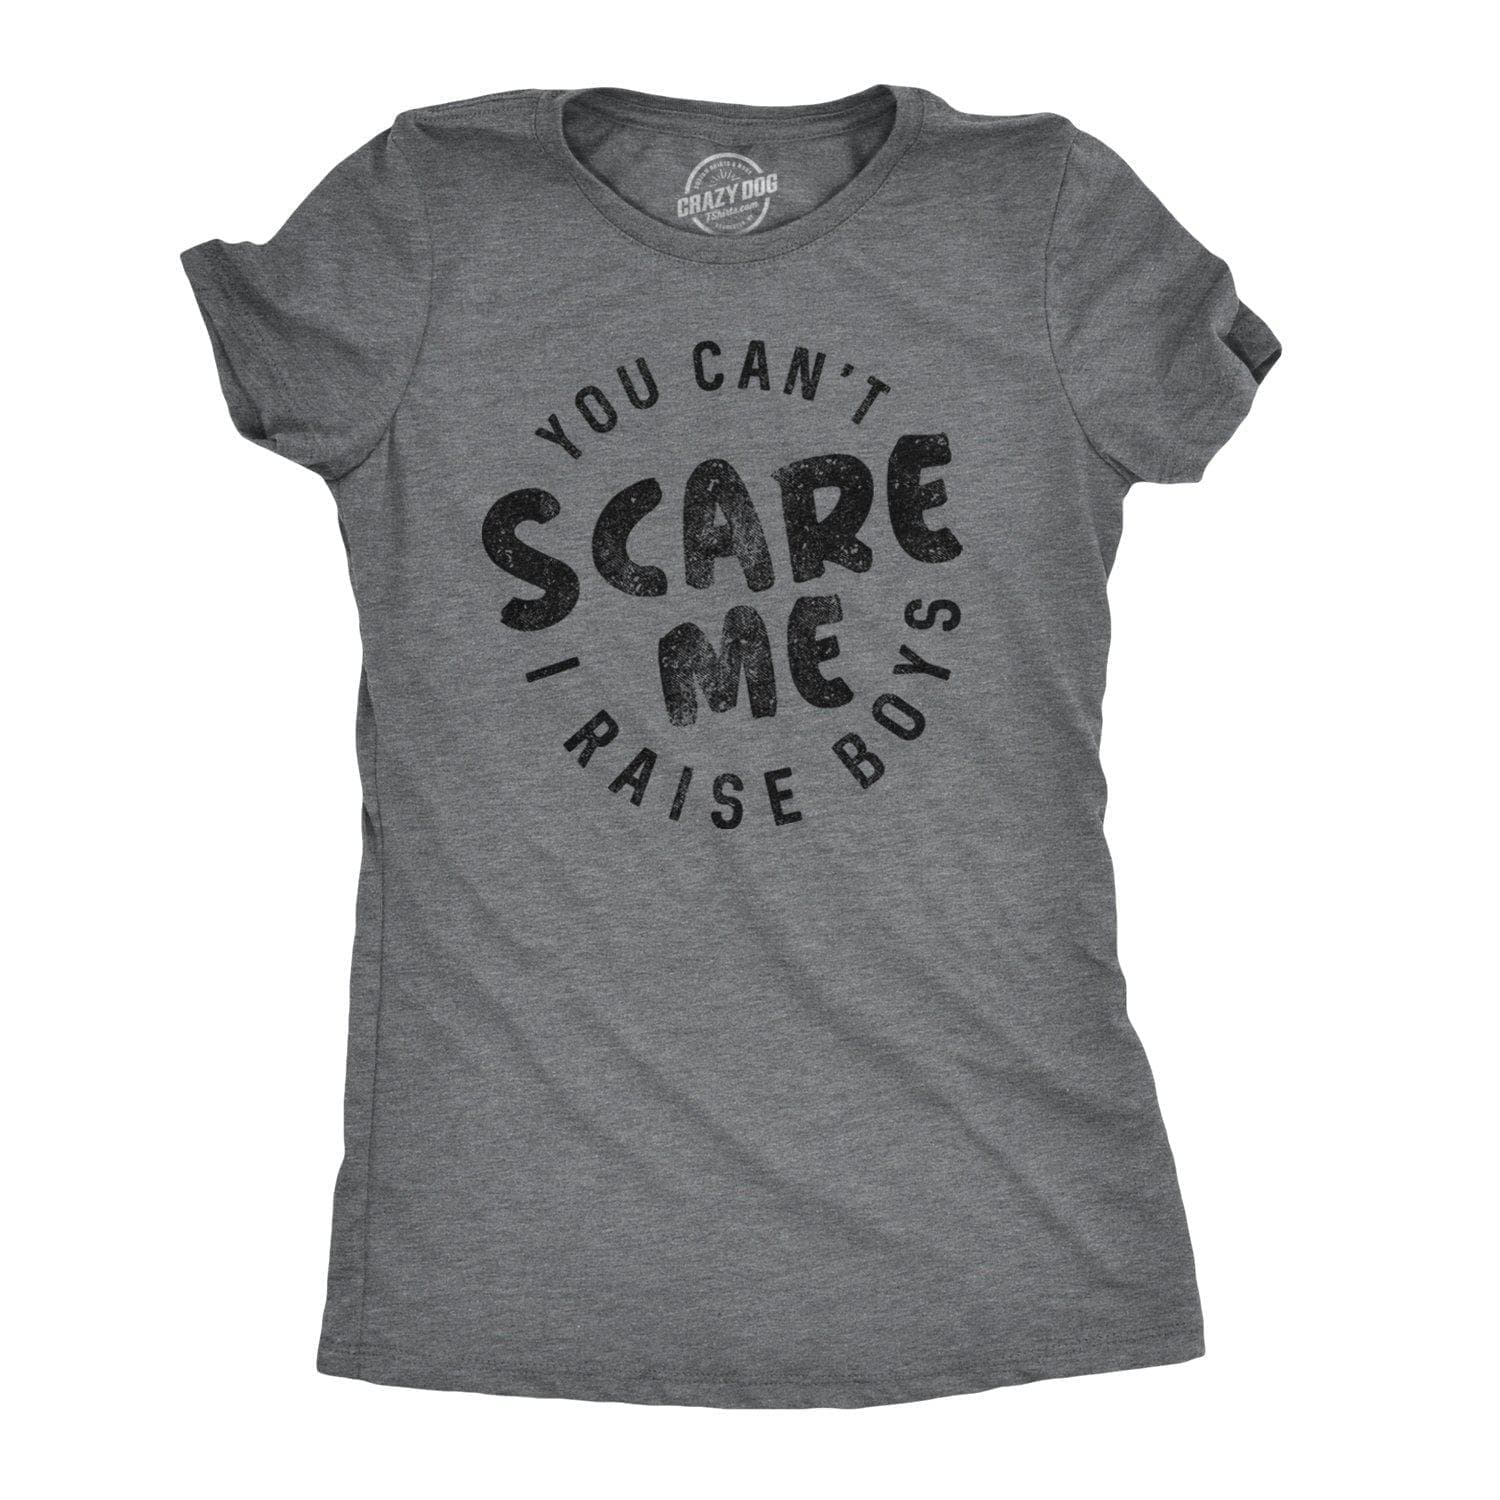 You Can't Scare Me I Raise Boys Women's Tshirt  -  Crazy Dog T-Shirts